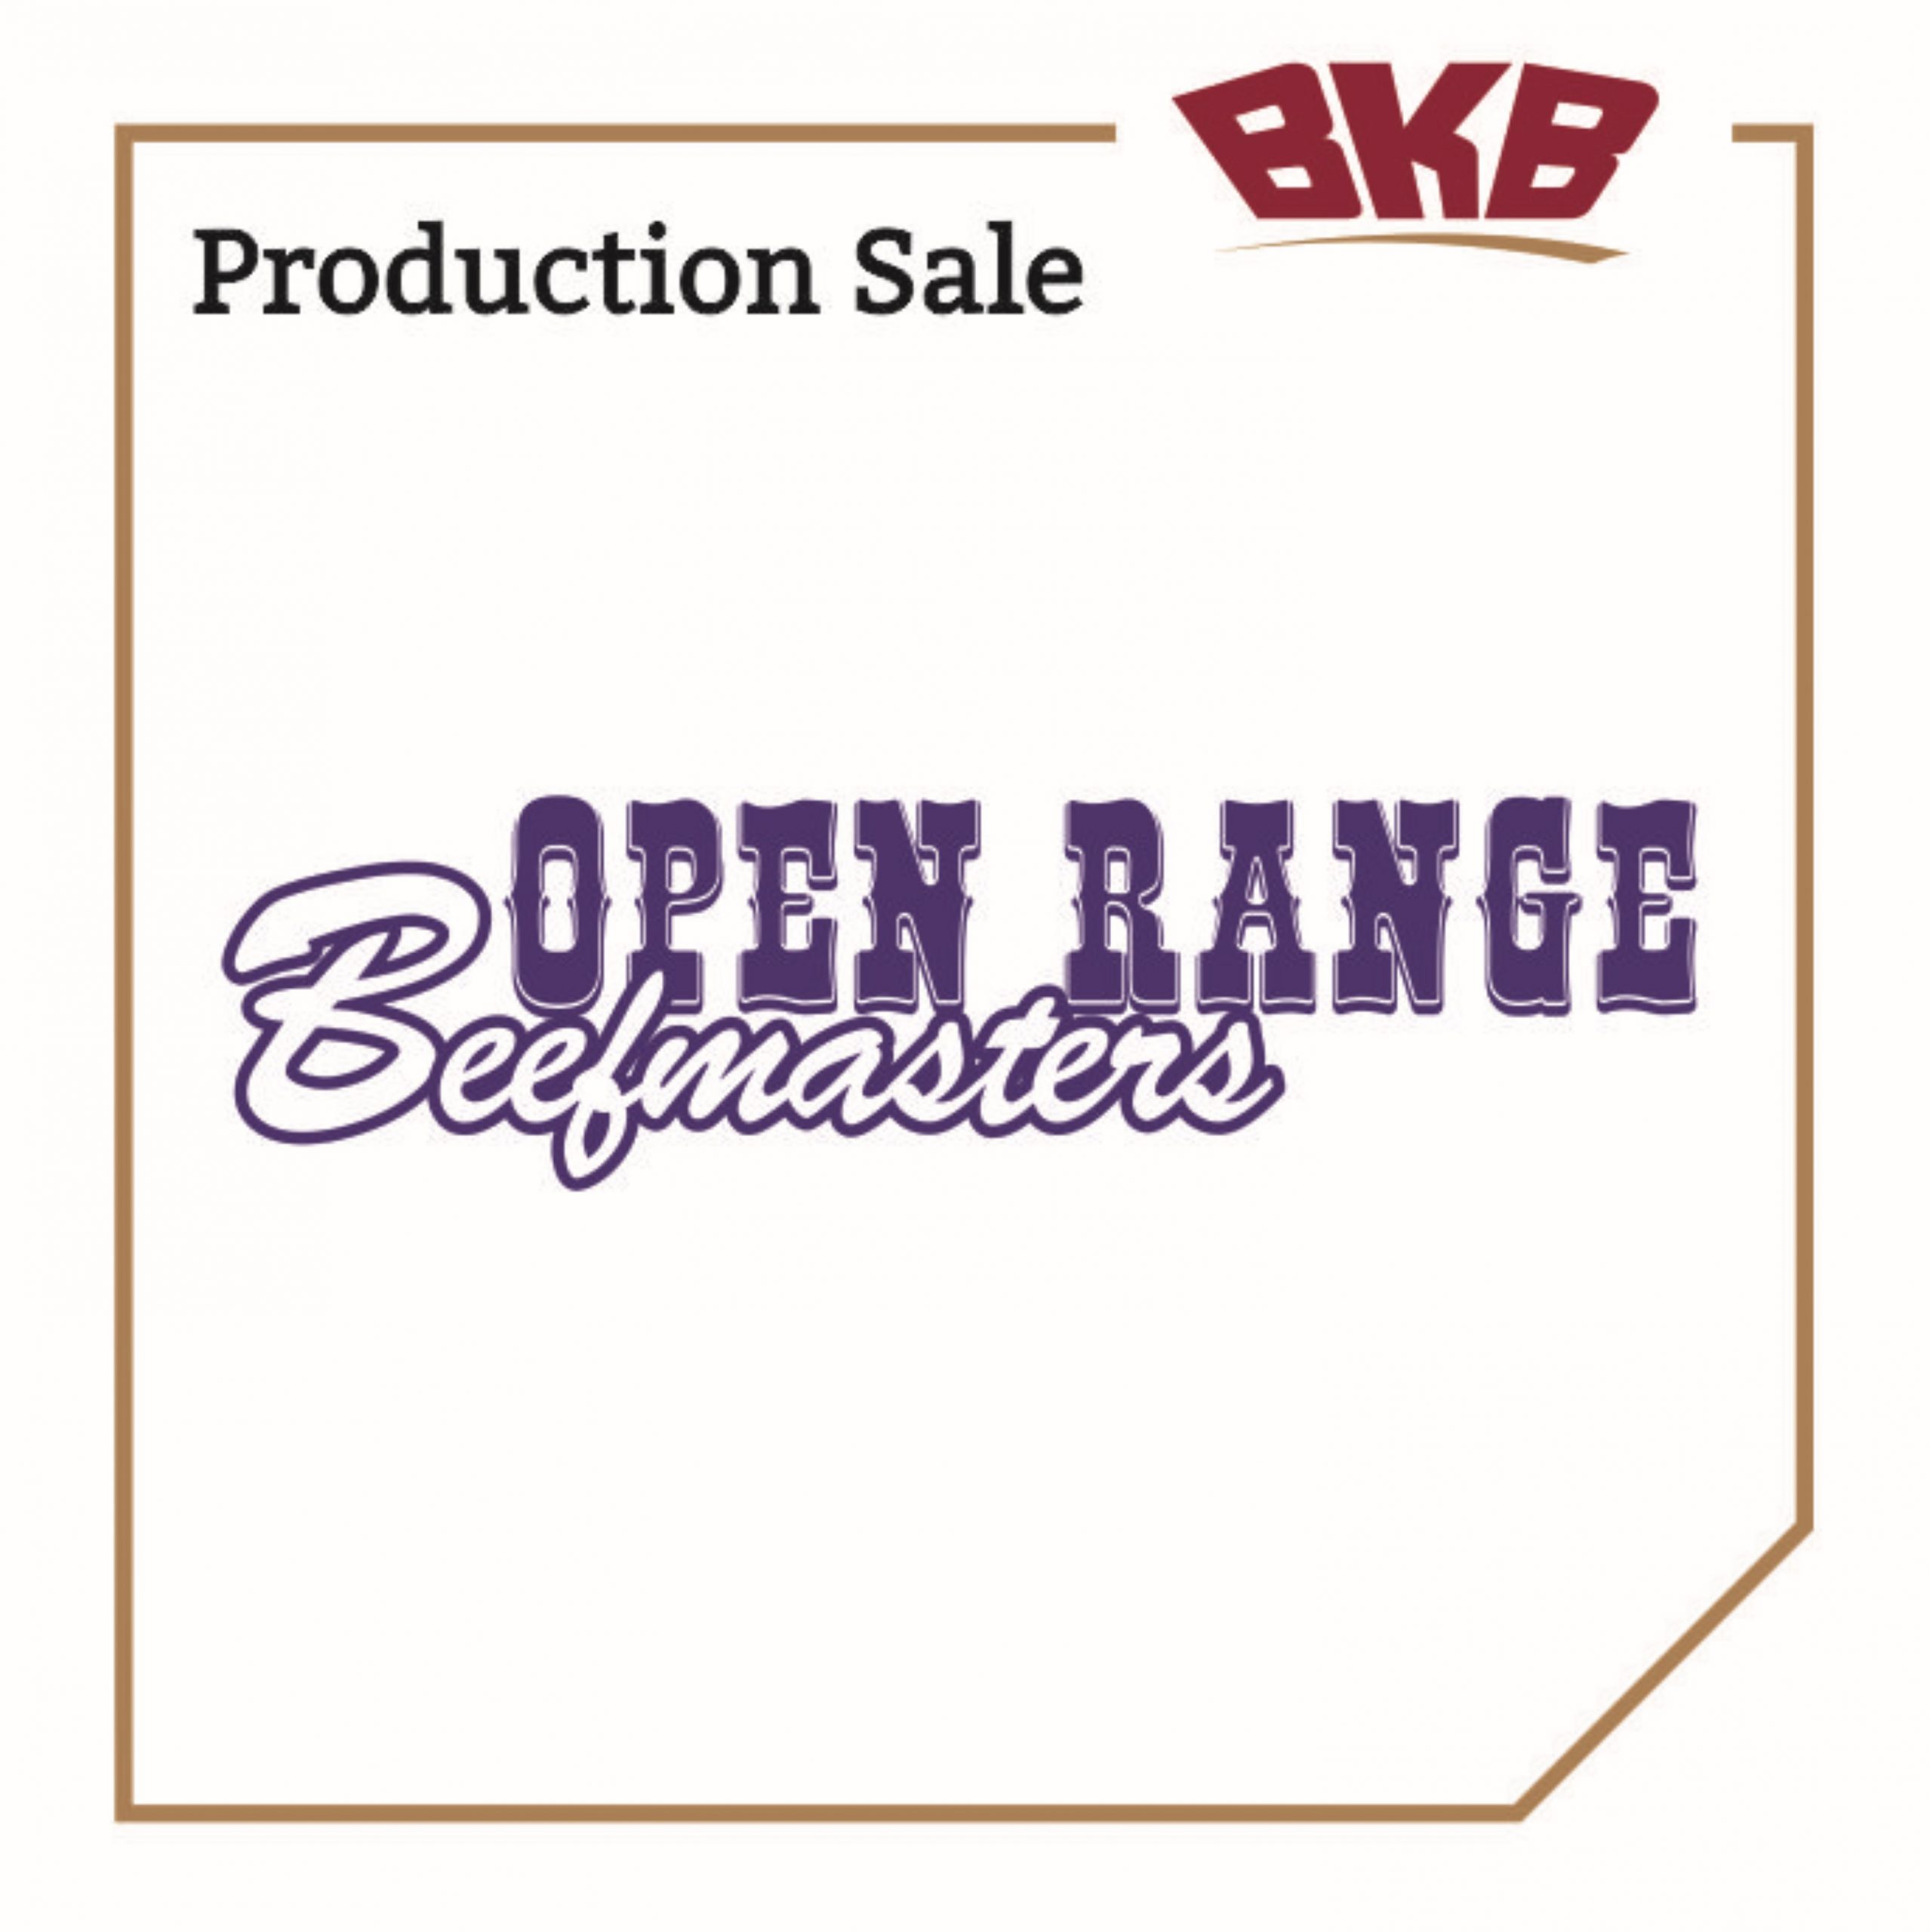 OPEN RANGE BEEFMASTERS PRODUCTION AUCTION | BKB Events - For all agricultural events and auctions